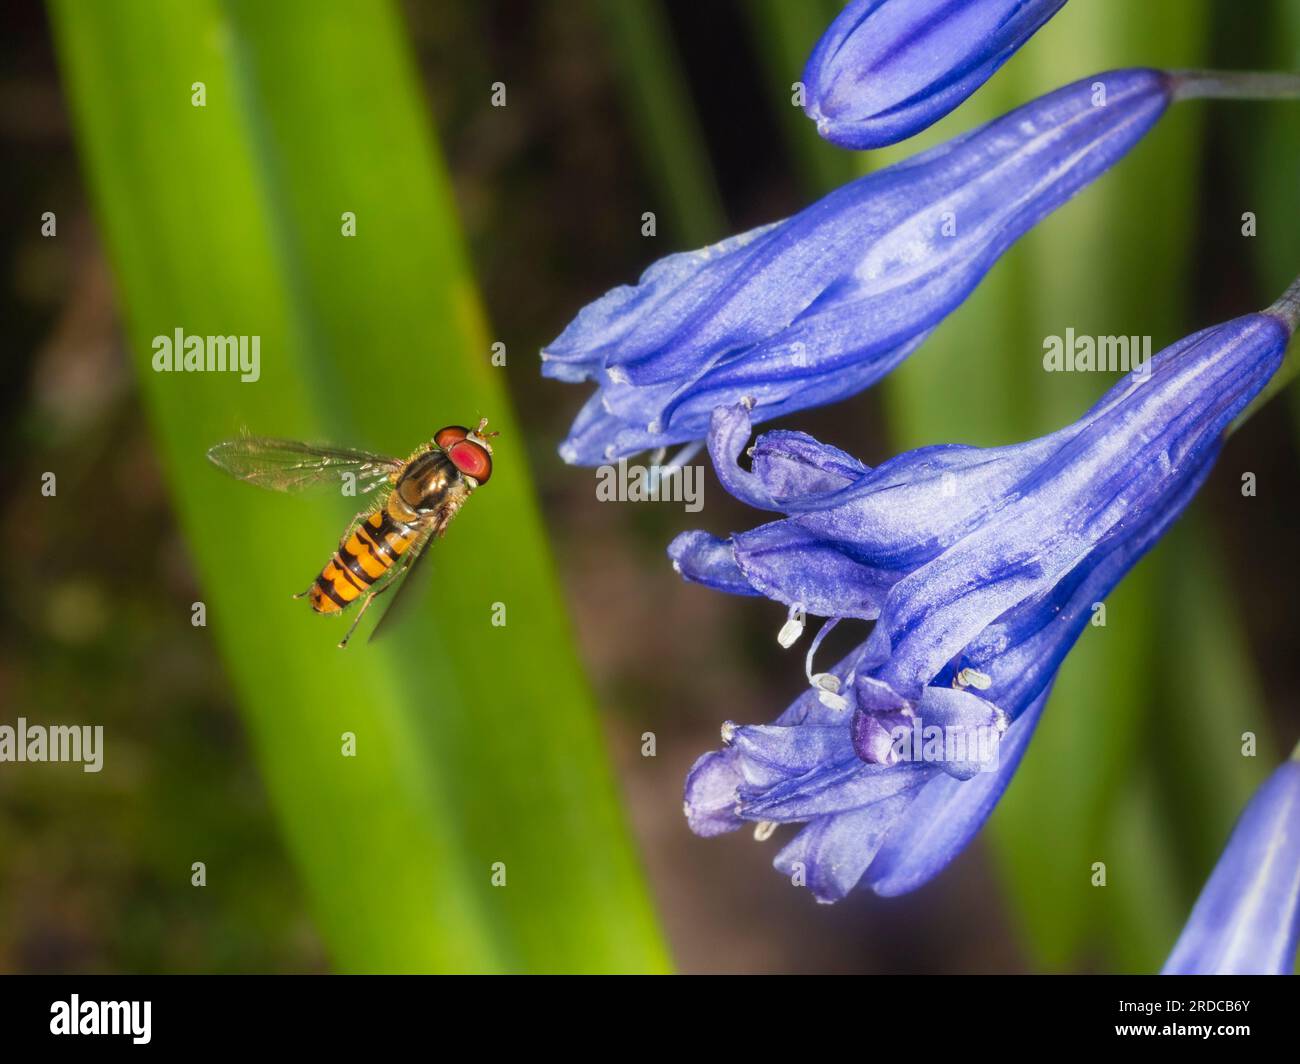 Marmalade hoverfly, Episyrphus balteatus, hovering before the blue trumpets of Agapanthus 'Bressingham Blue' in a UK garden Stock Photo